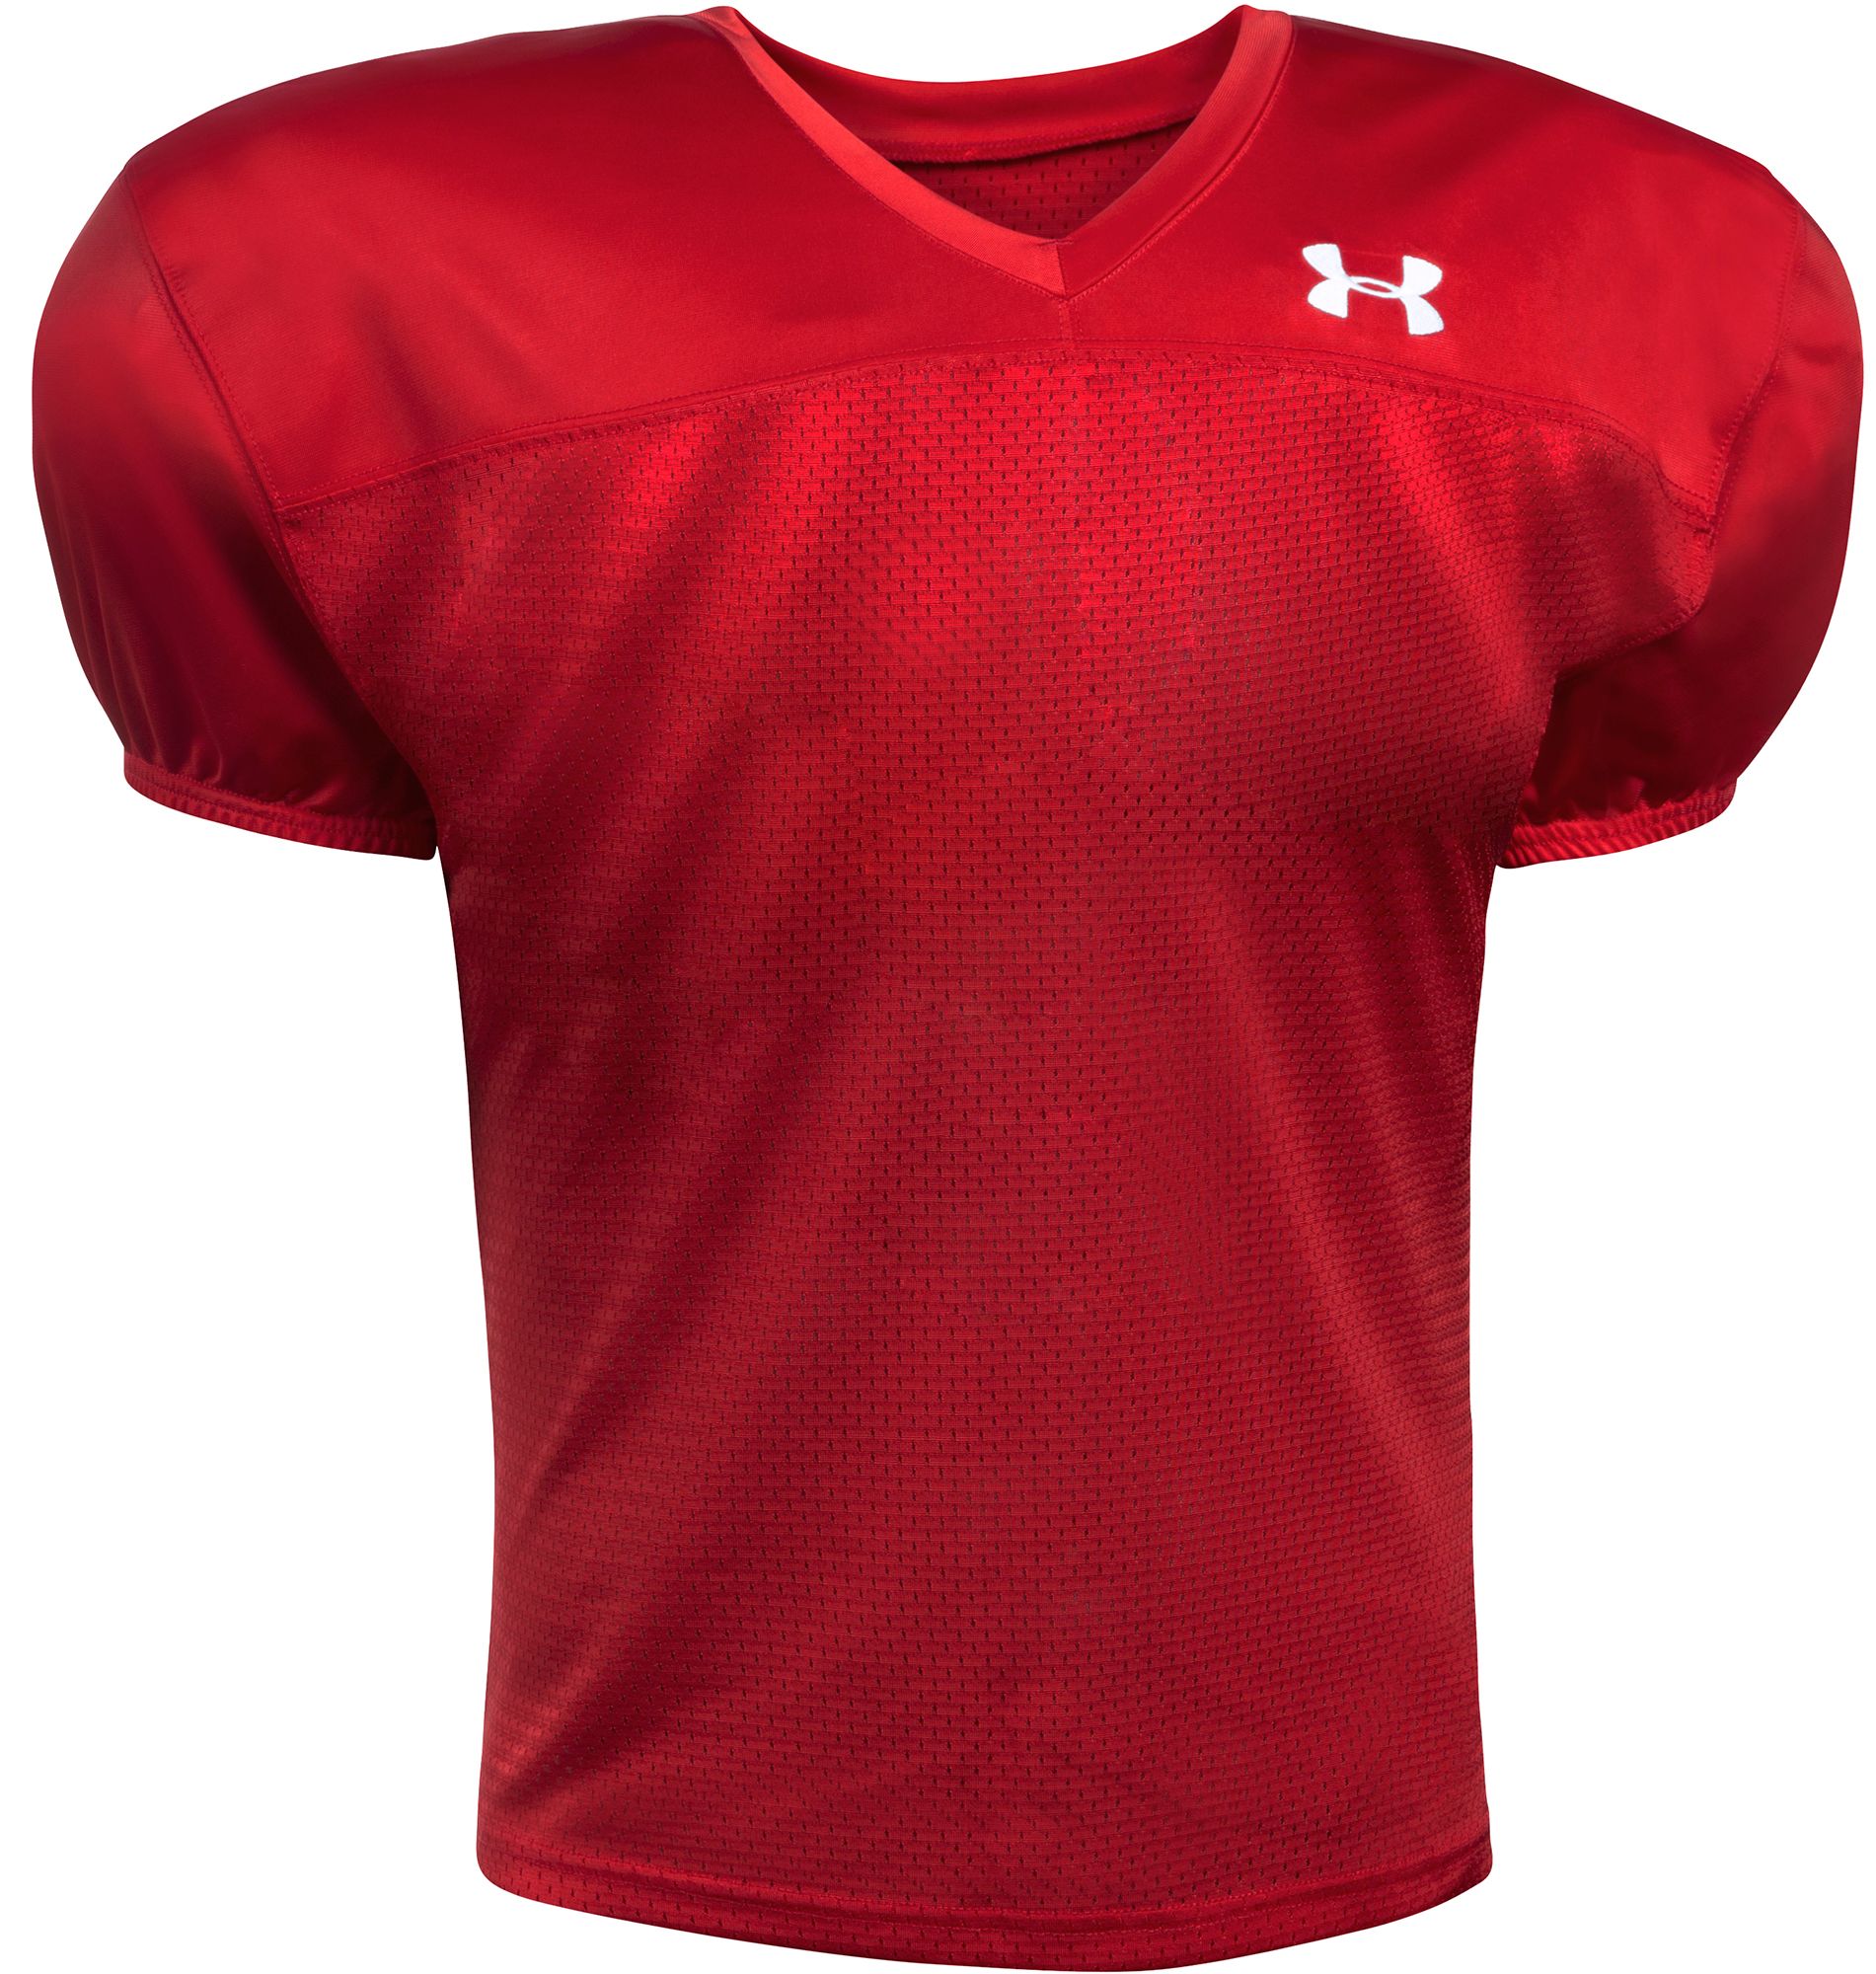 red football jersey blank